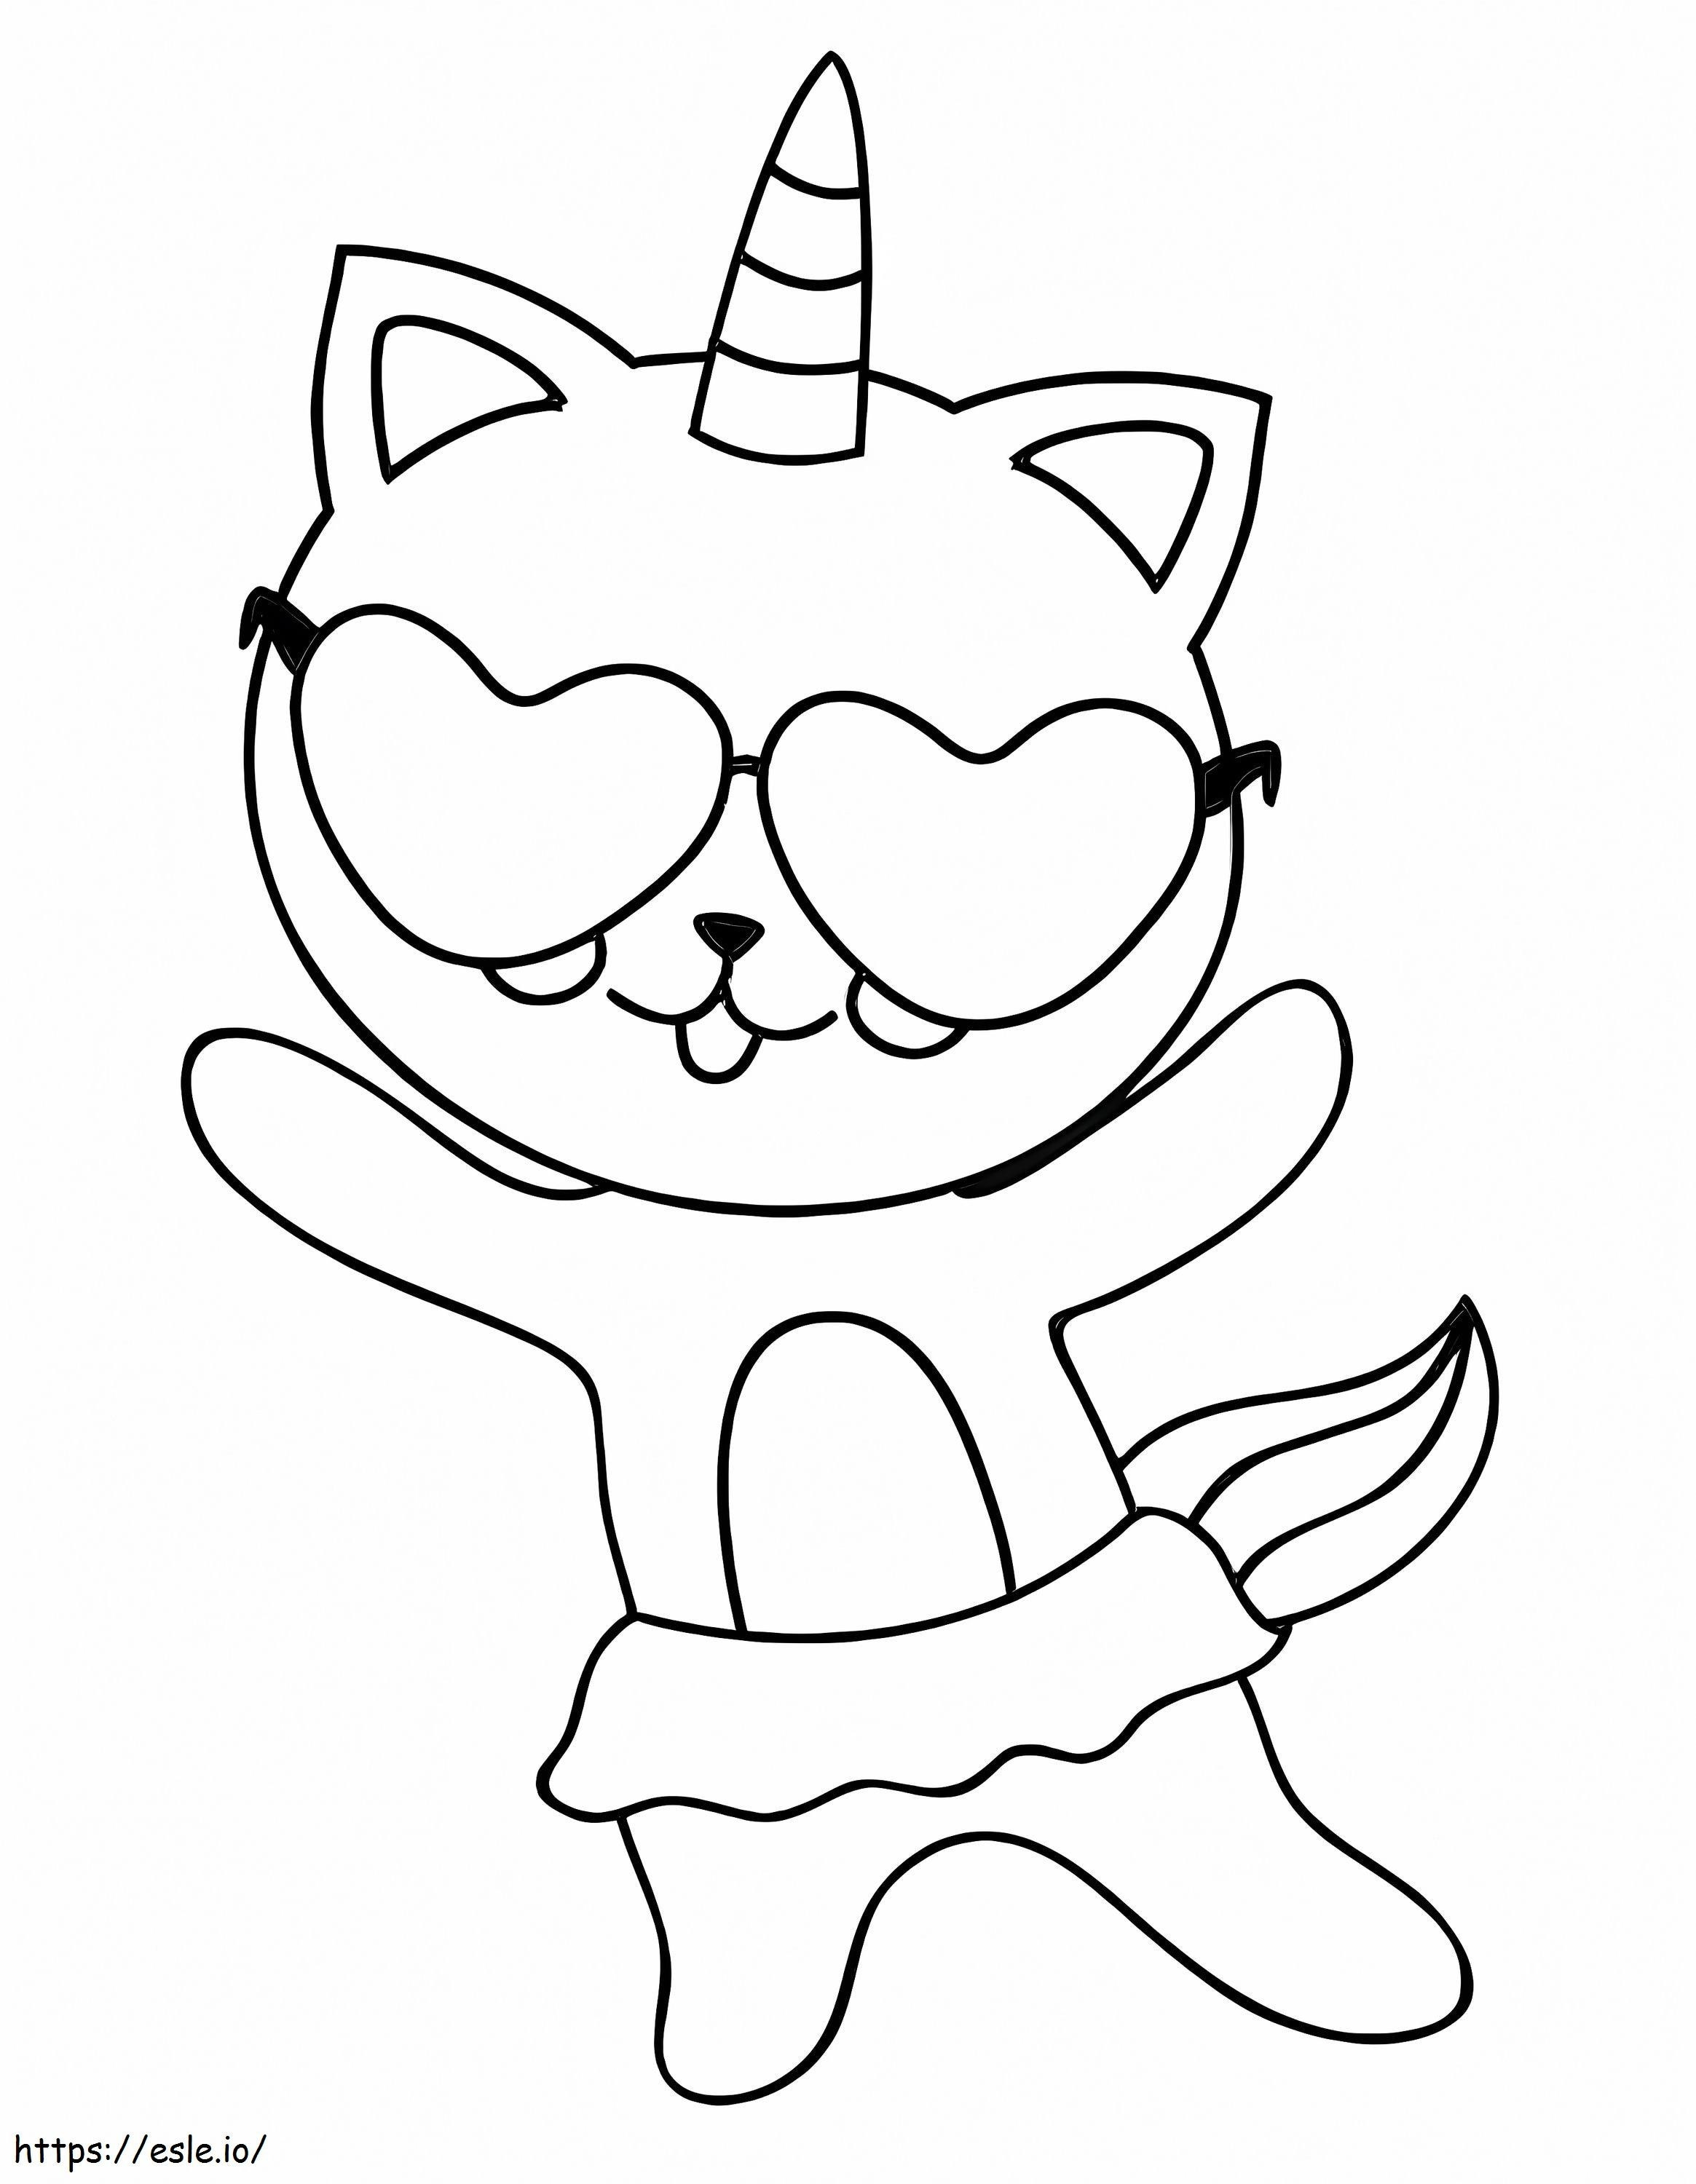 Dancing Unicorn Cat coloring page